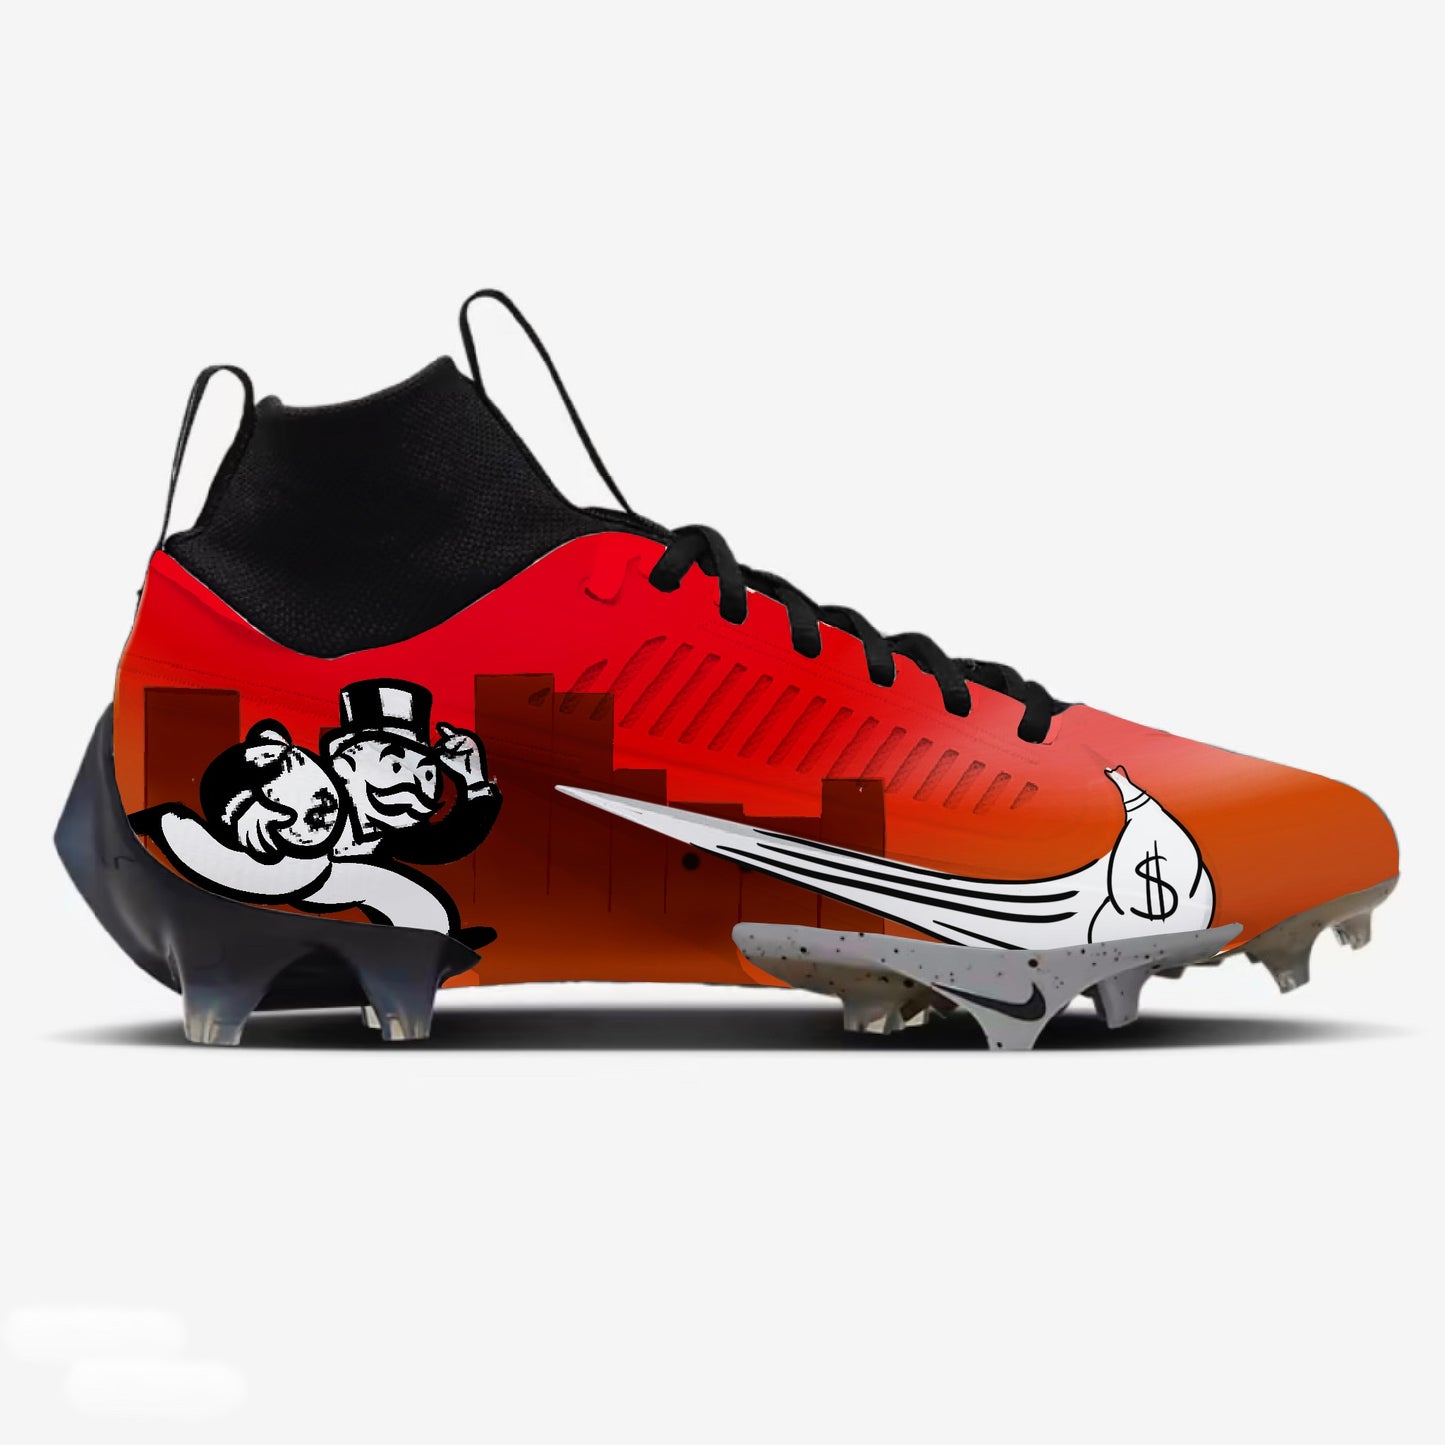 Bag Chaser Nike Football Cleats